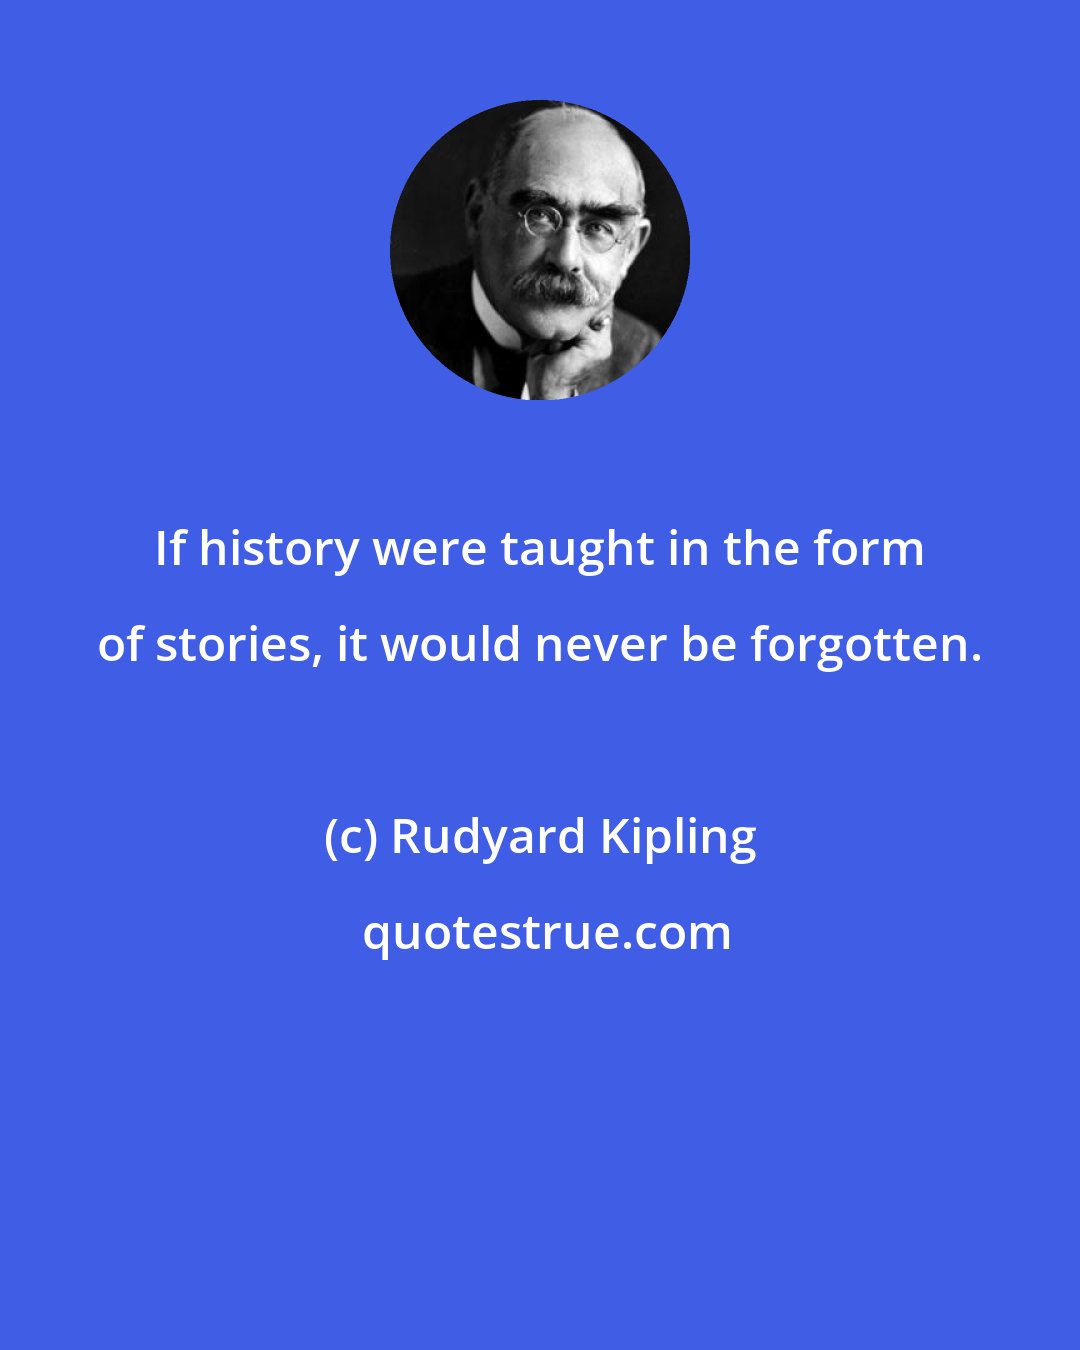 Rudyard Kipling: If history were taught in the form of stories, it would never be forgotten.